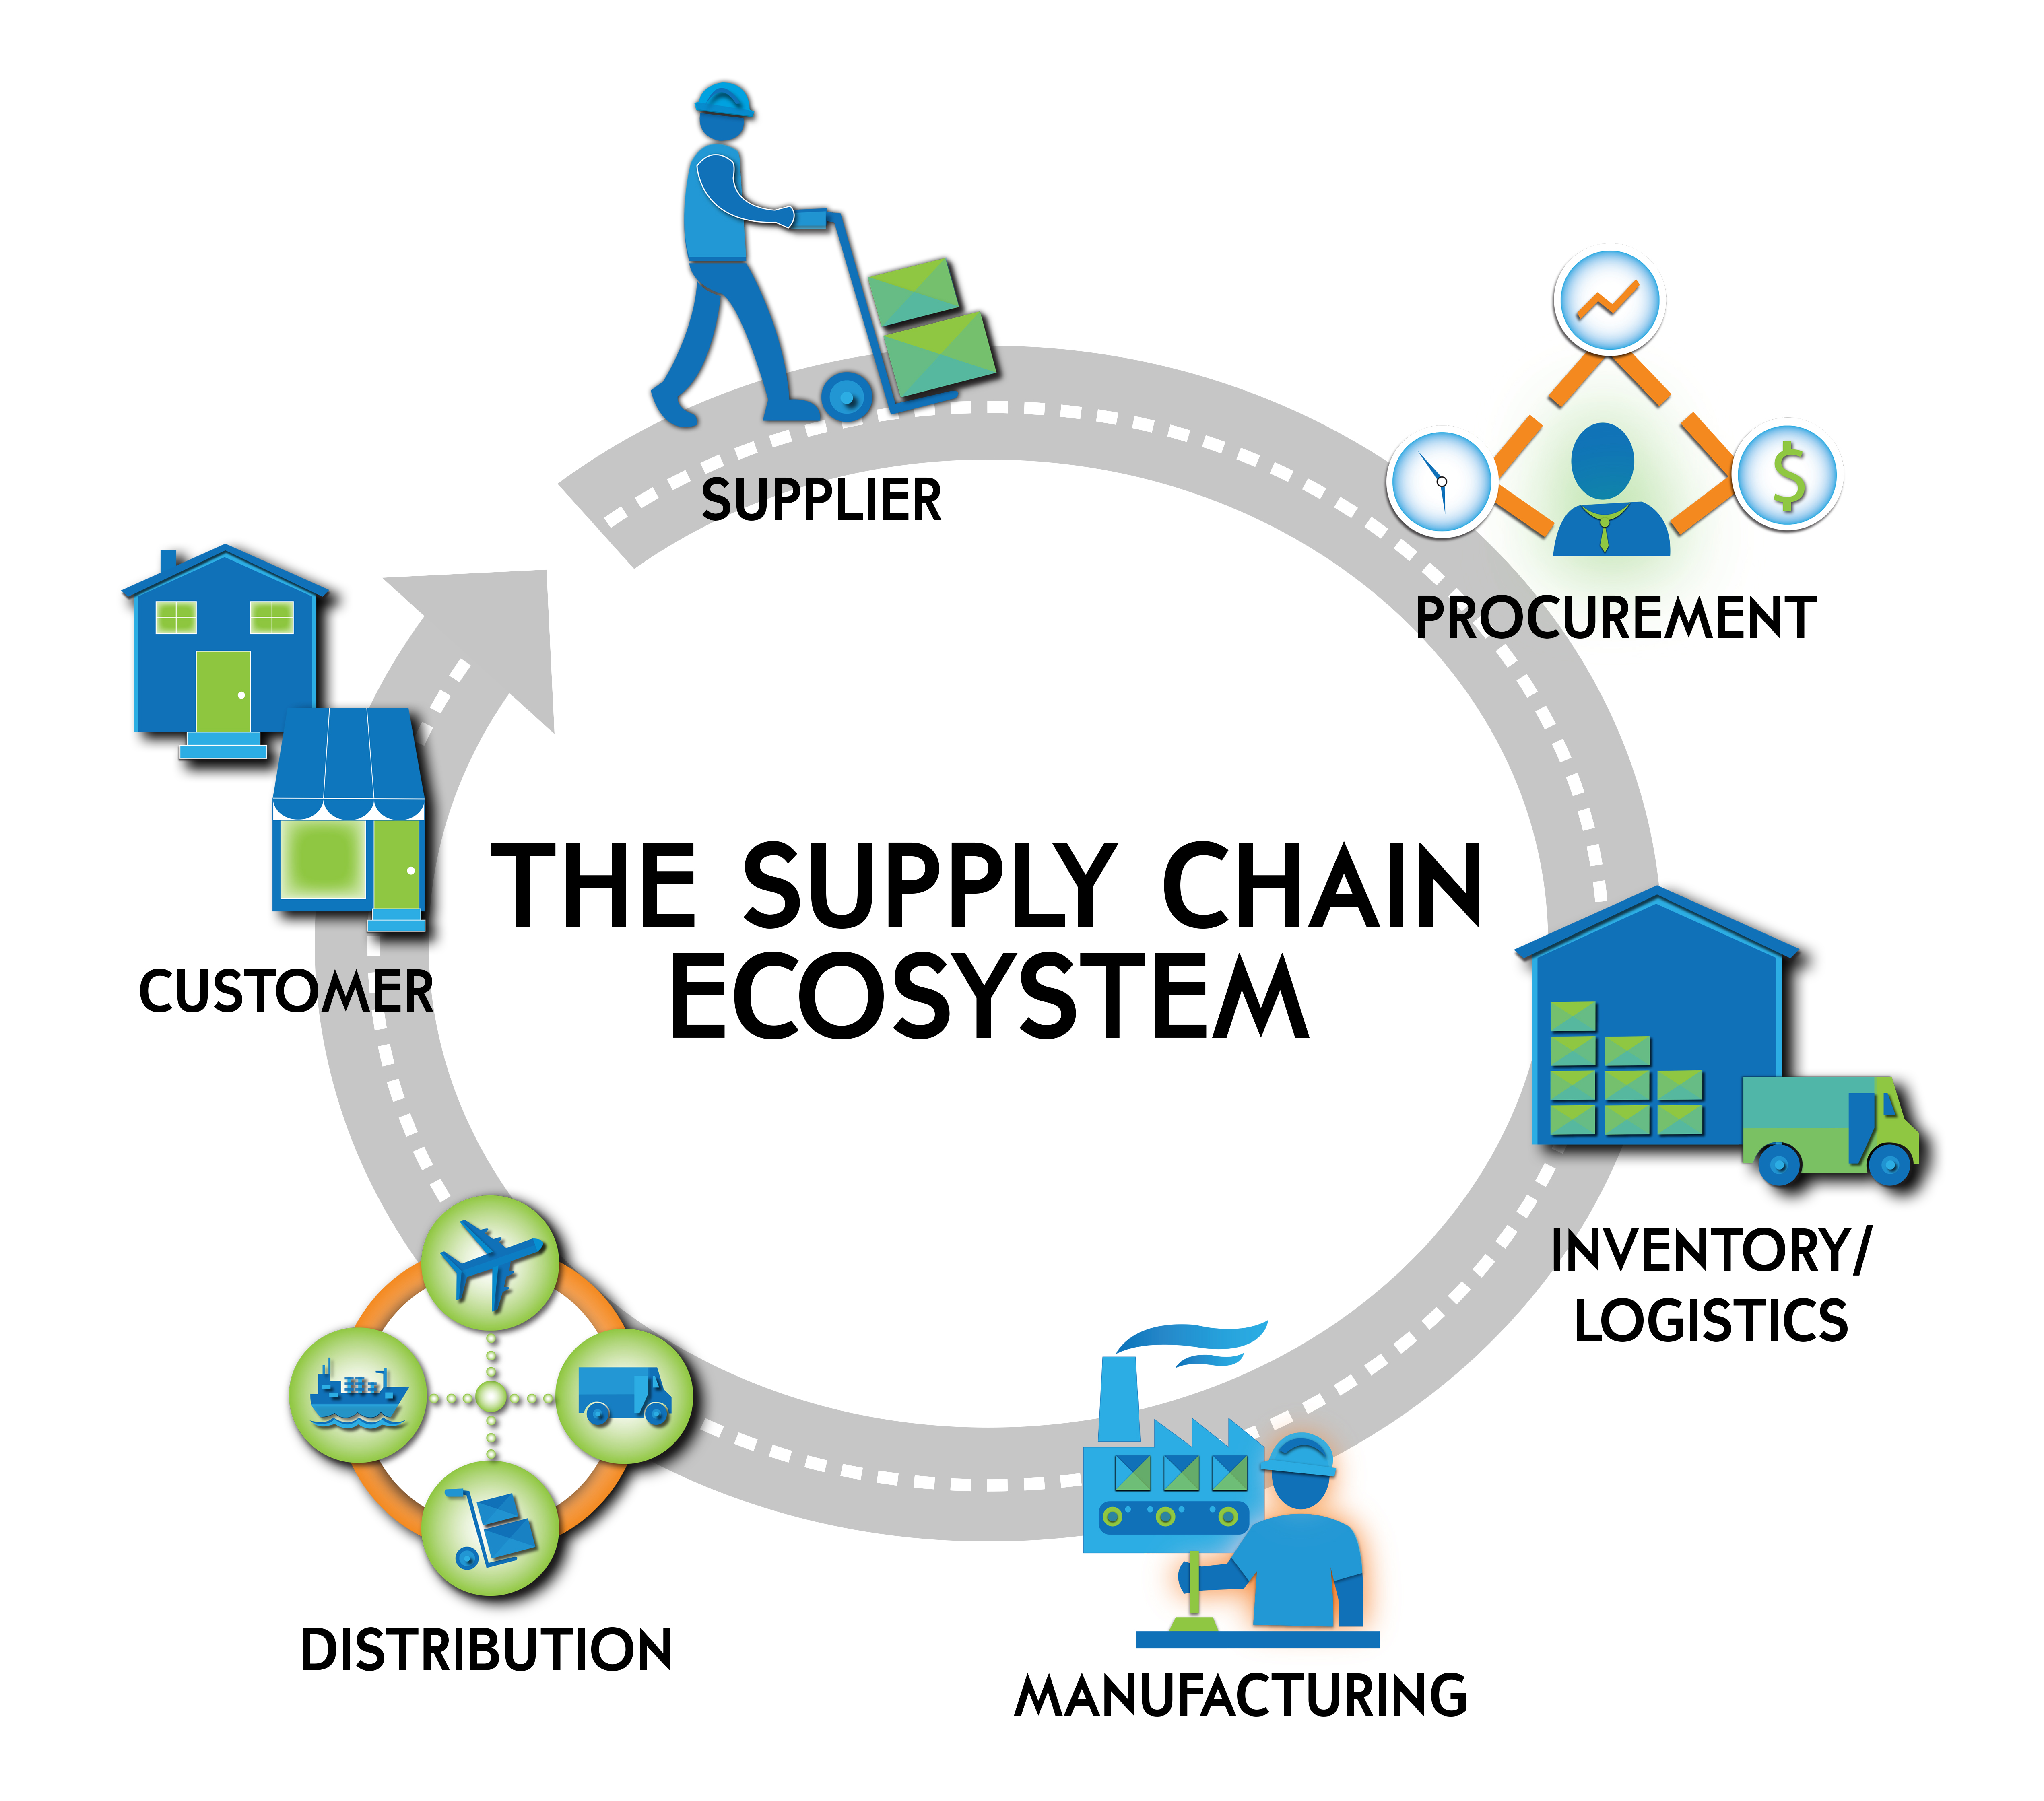 thesis sustainability supply chain